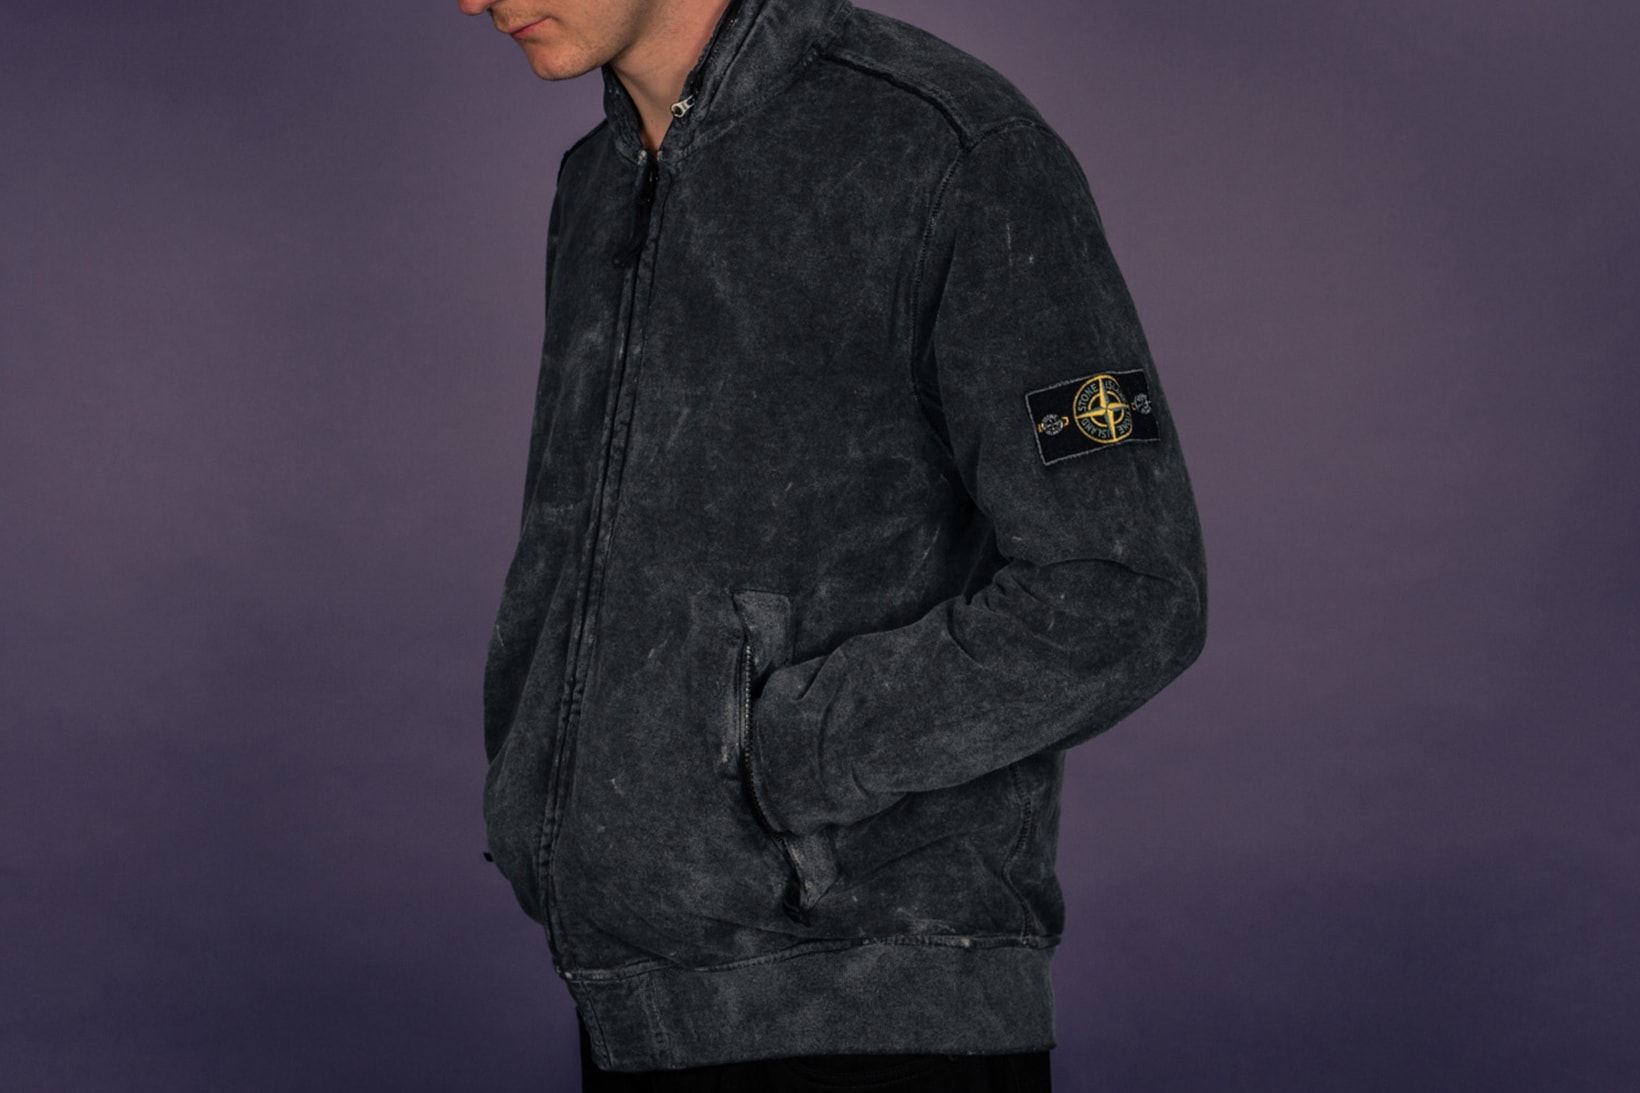 Stone Island 2017 Fall Winter "Frost" Collection Lookbook